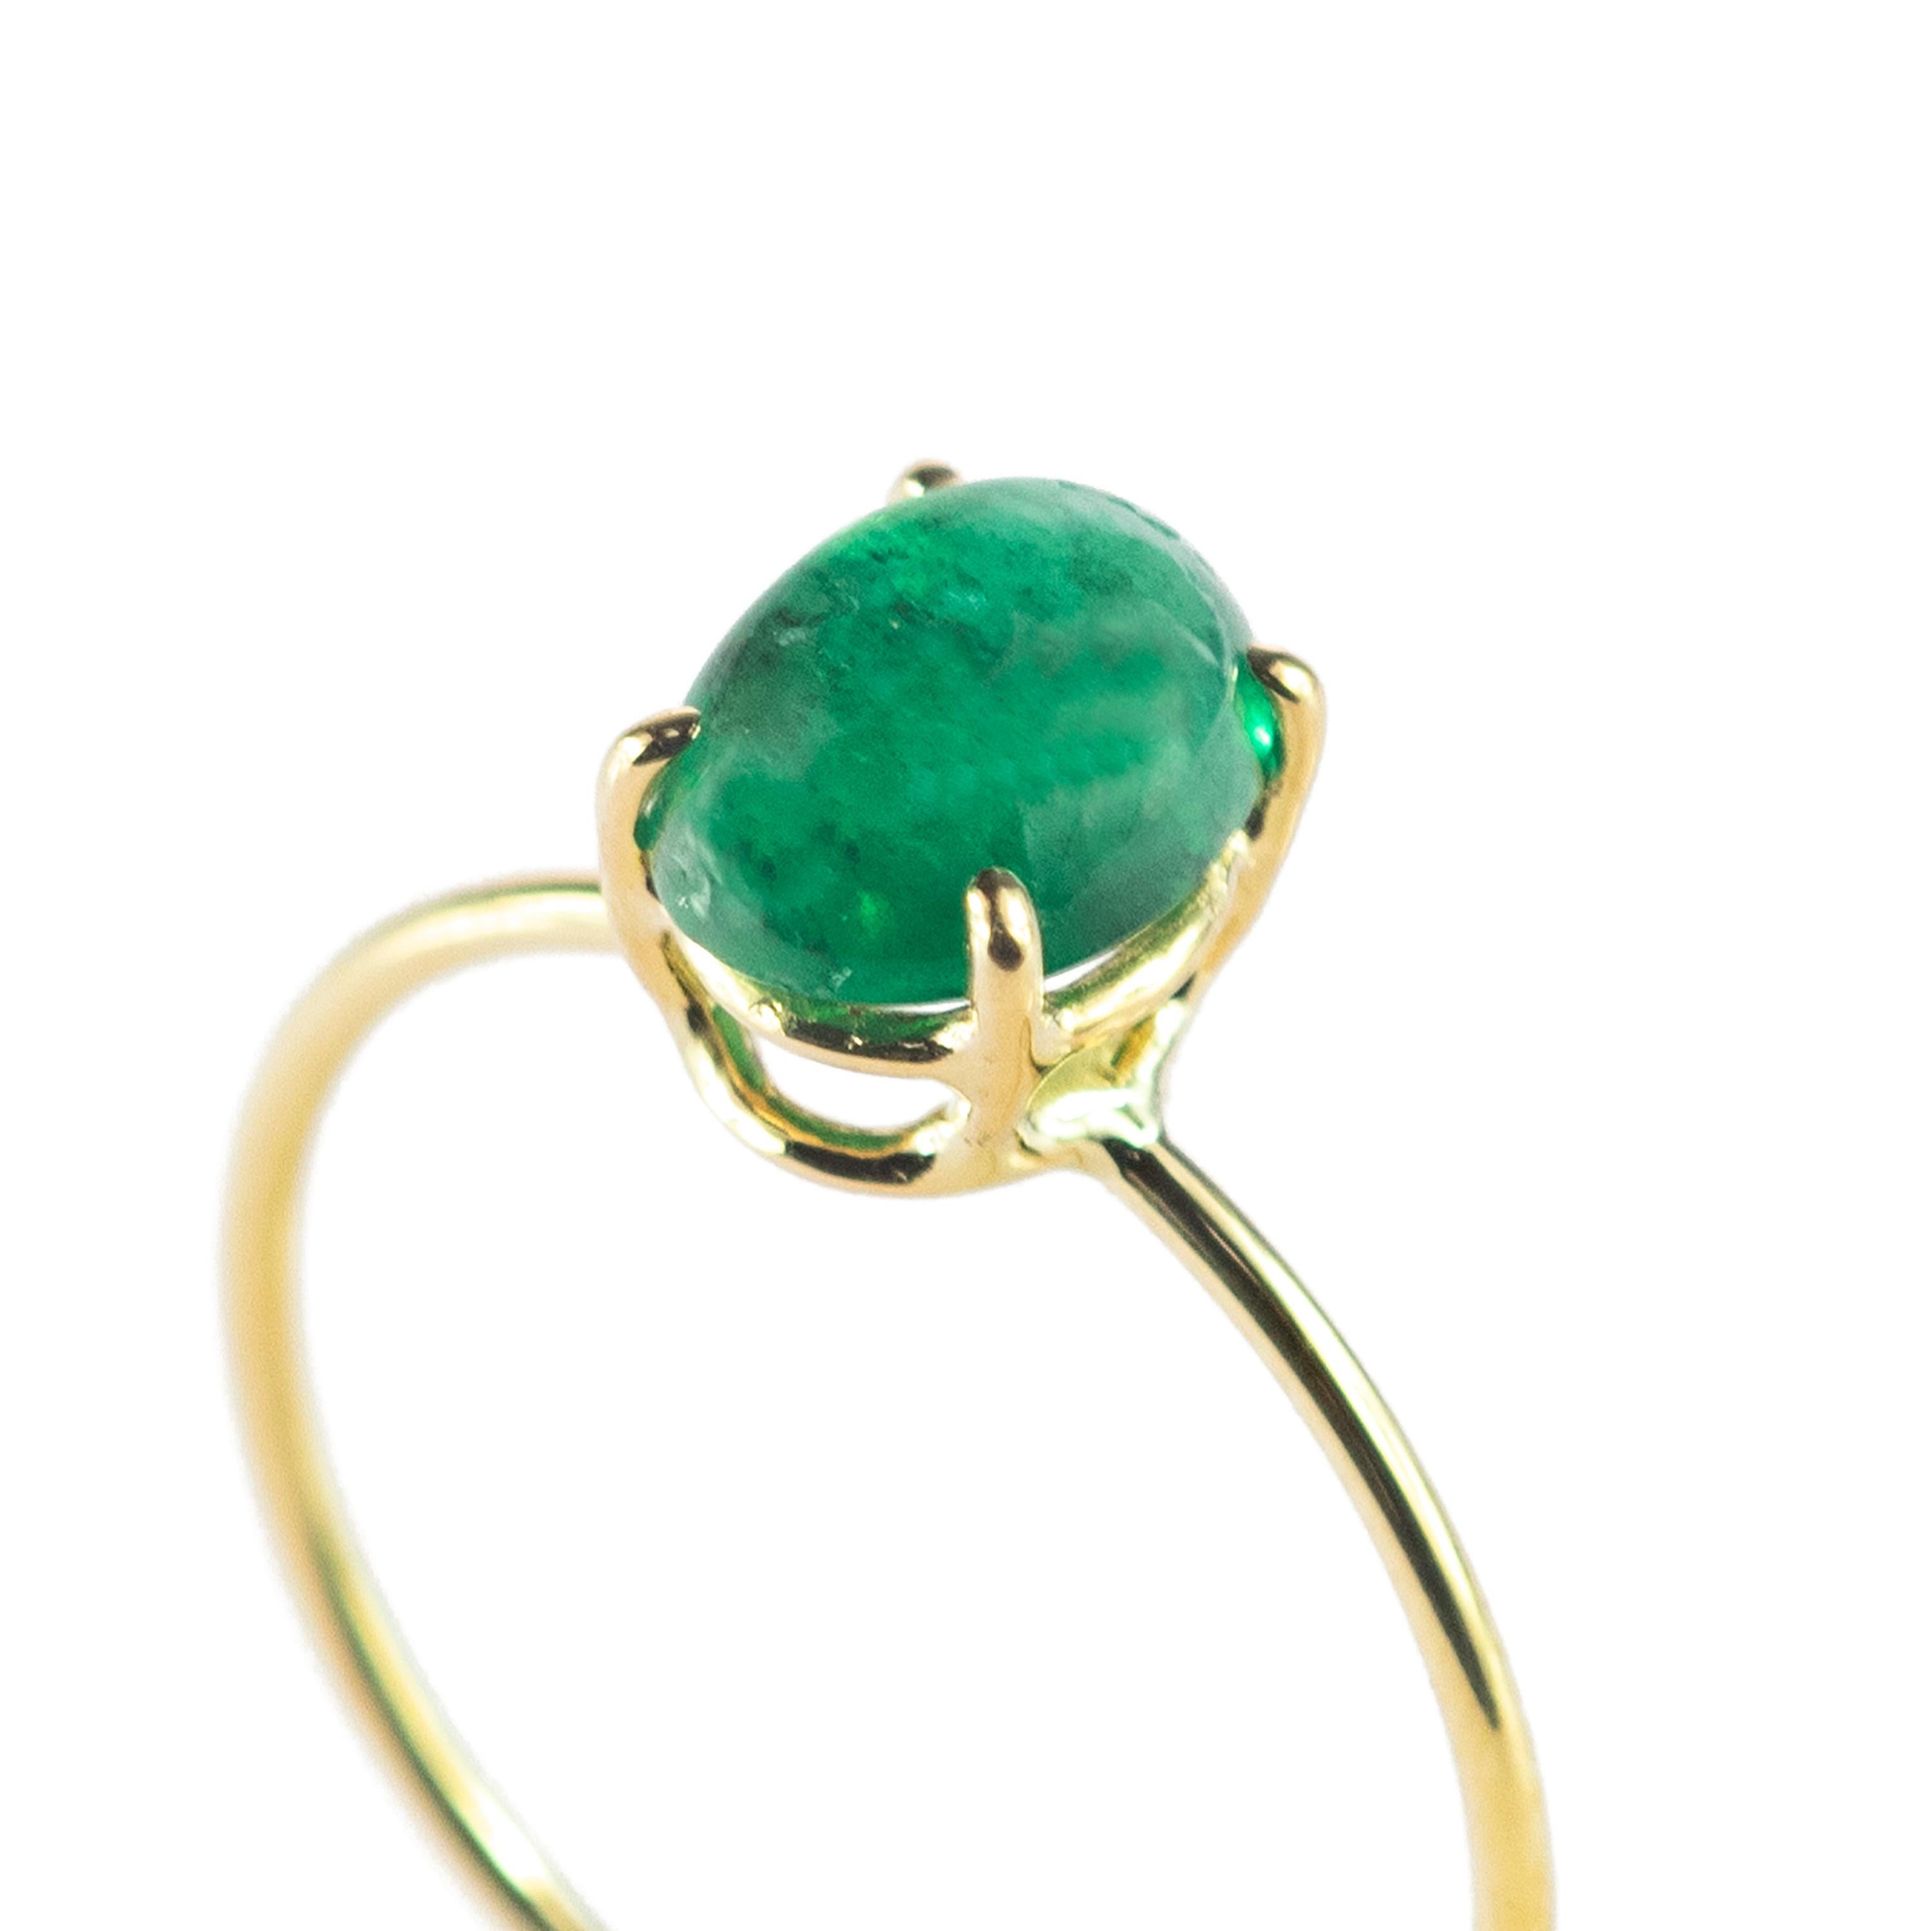 Signature INTINI Jewels Emerald jewellery. Modern and Elegant midi ring design in 18k yellow gold.

It is a gem of fascination and vitality. Most importantly, emerald can bring you immense luck and fortunes, even when you lose hope. It is closely